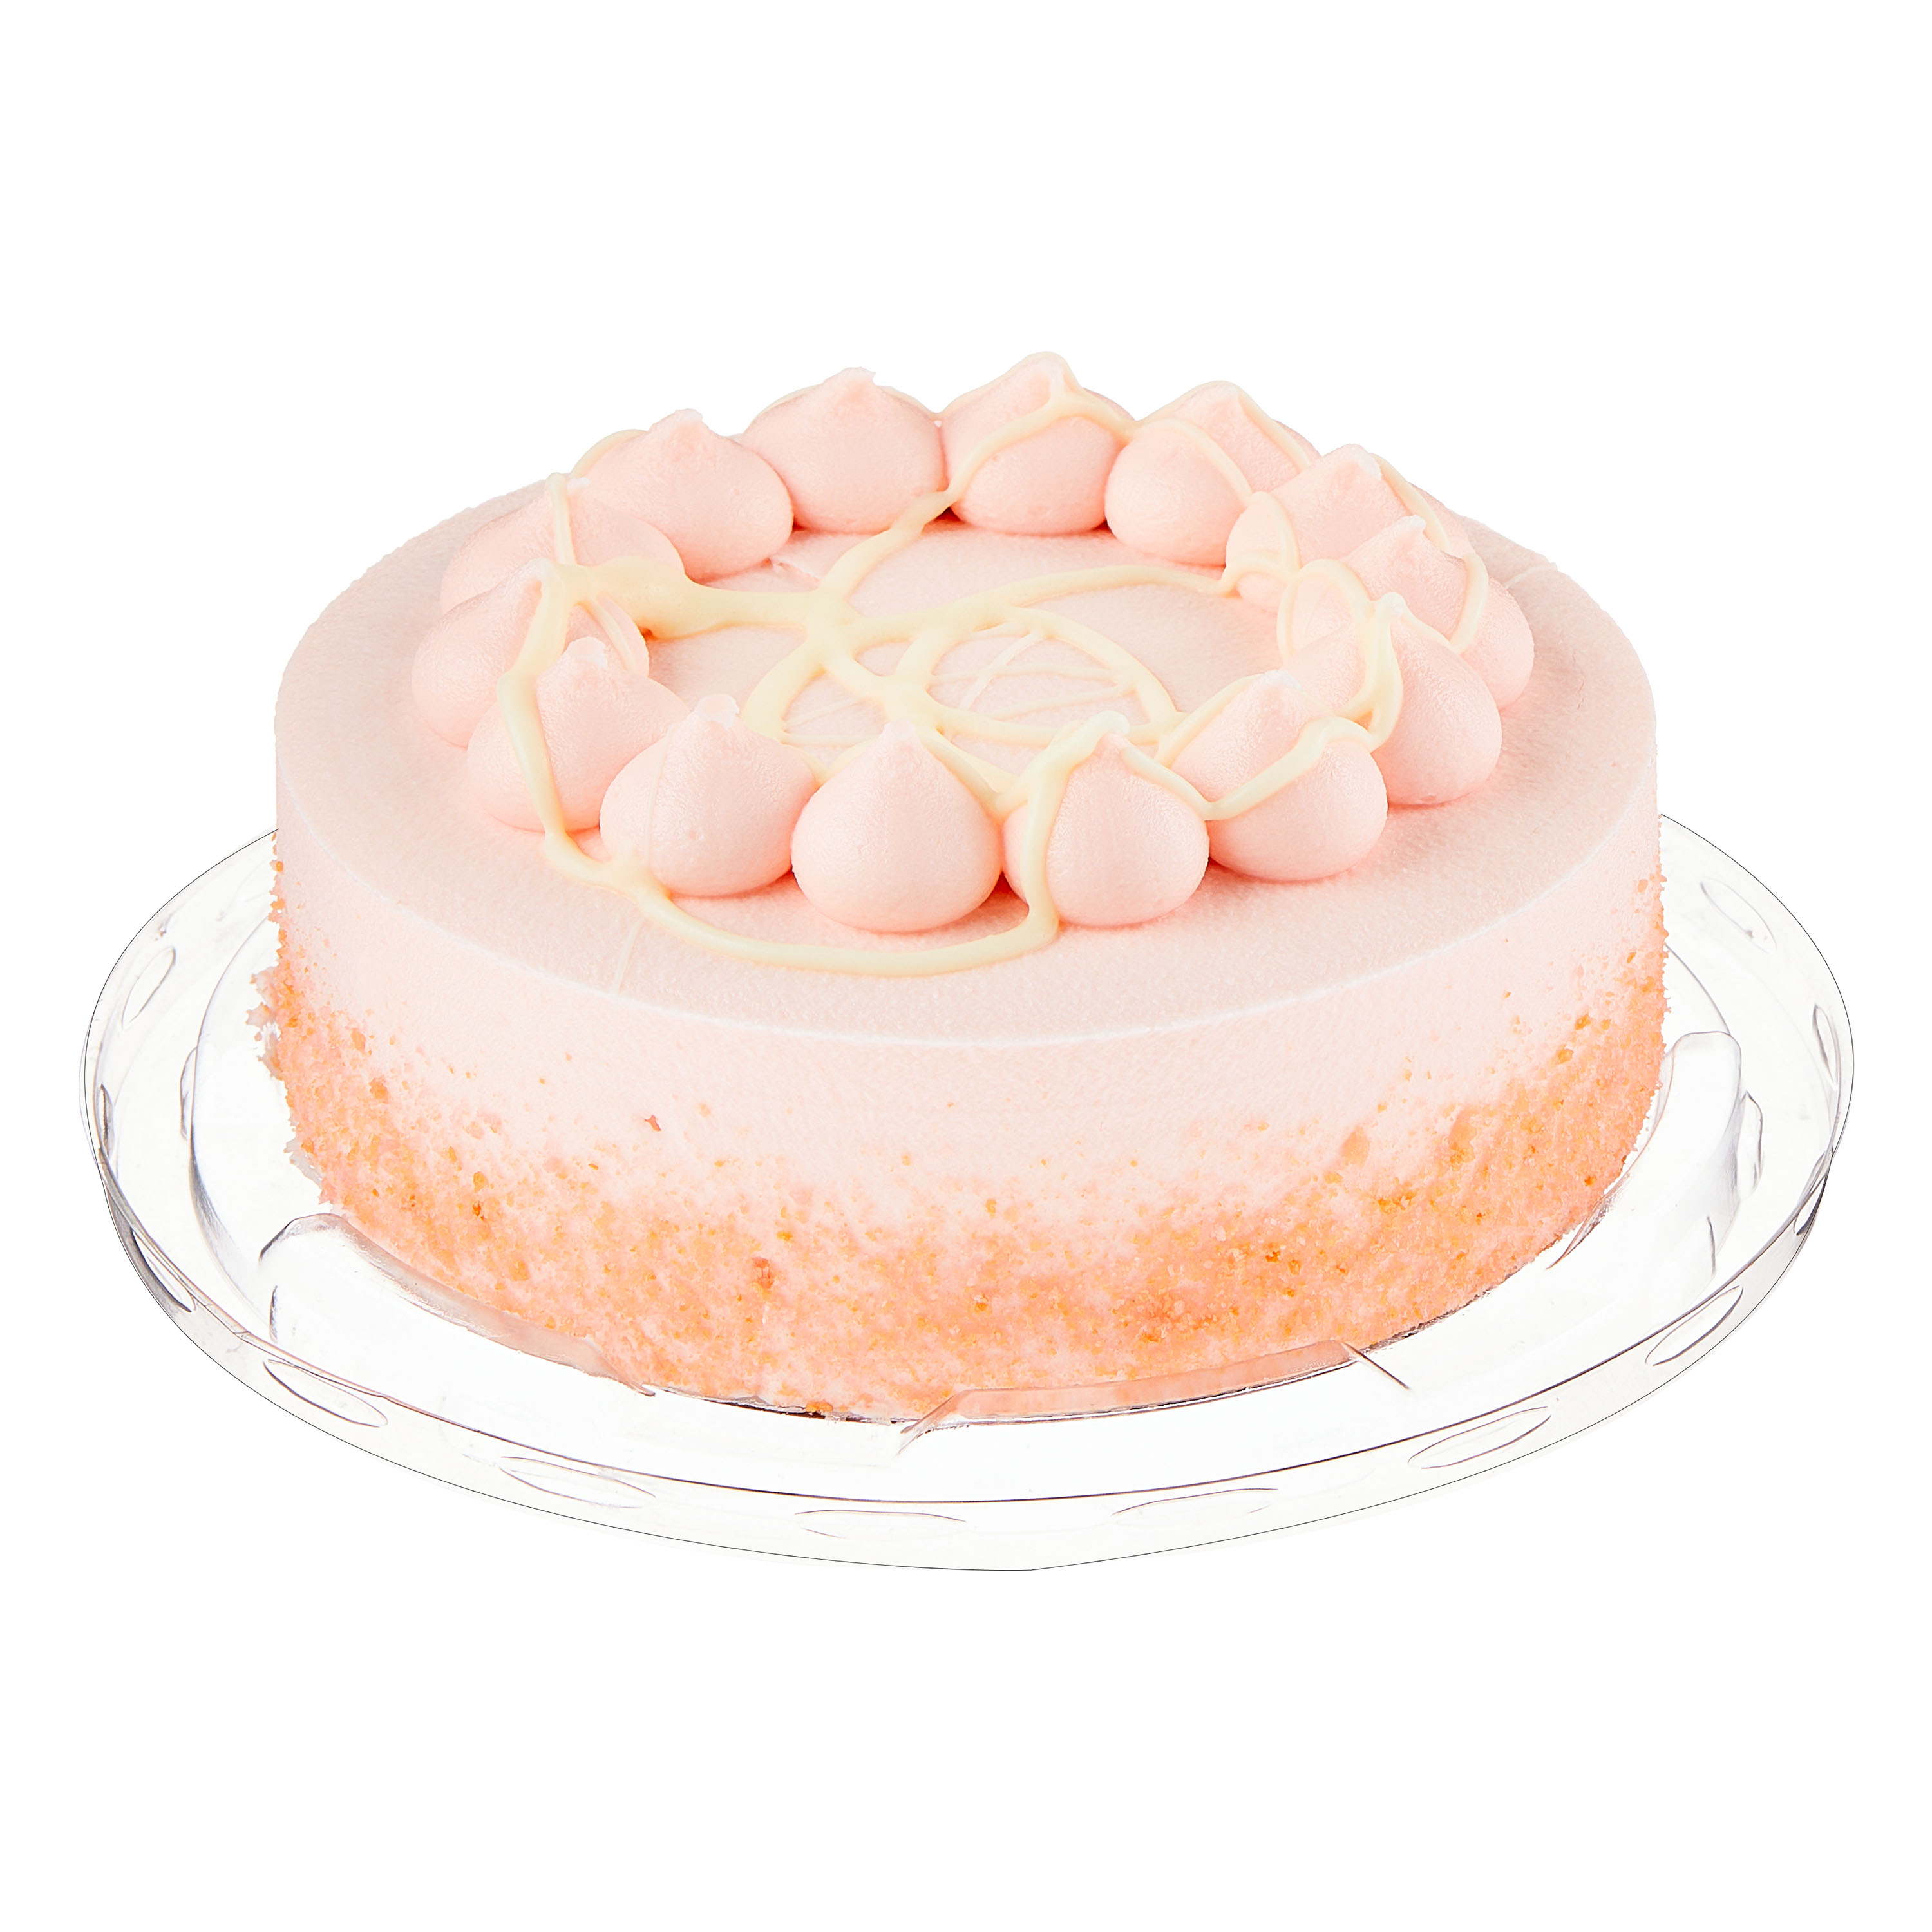 Freshness Guaranteed 5" Strawberry Cake with Strawberry Filling, 15.9 oz, 1 Count, Refrigerated